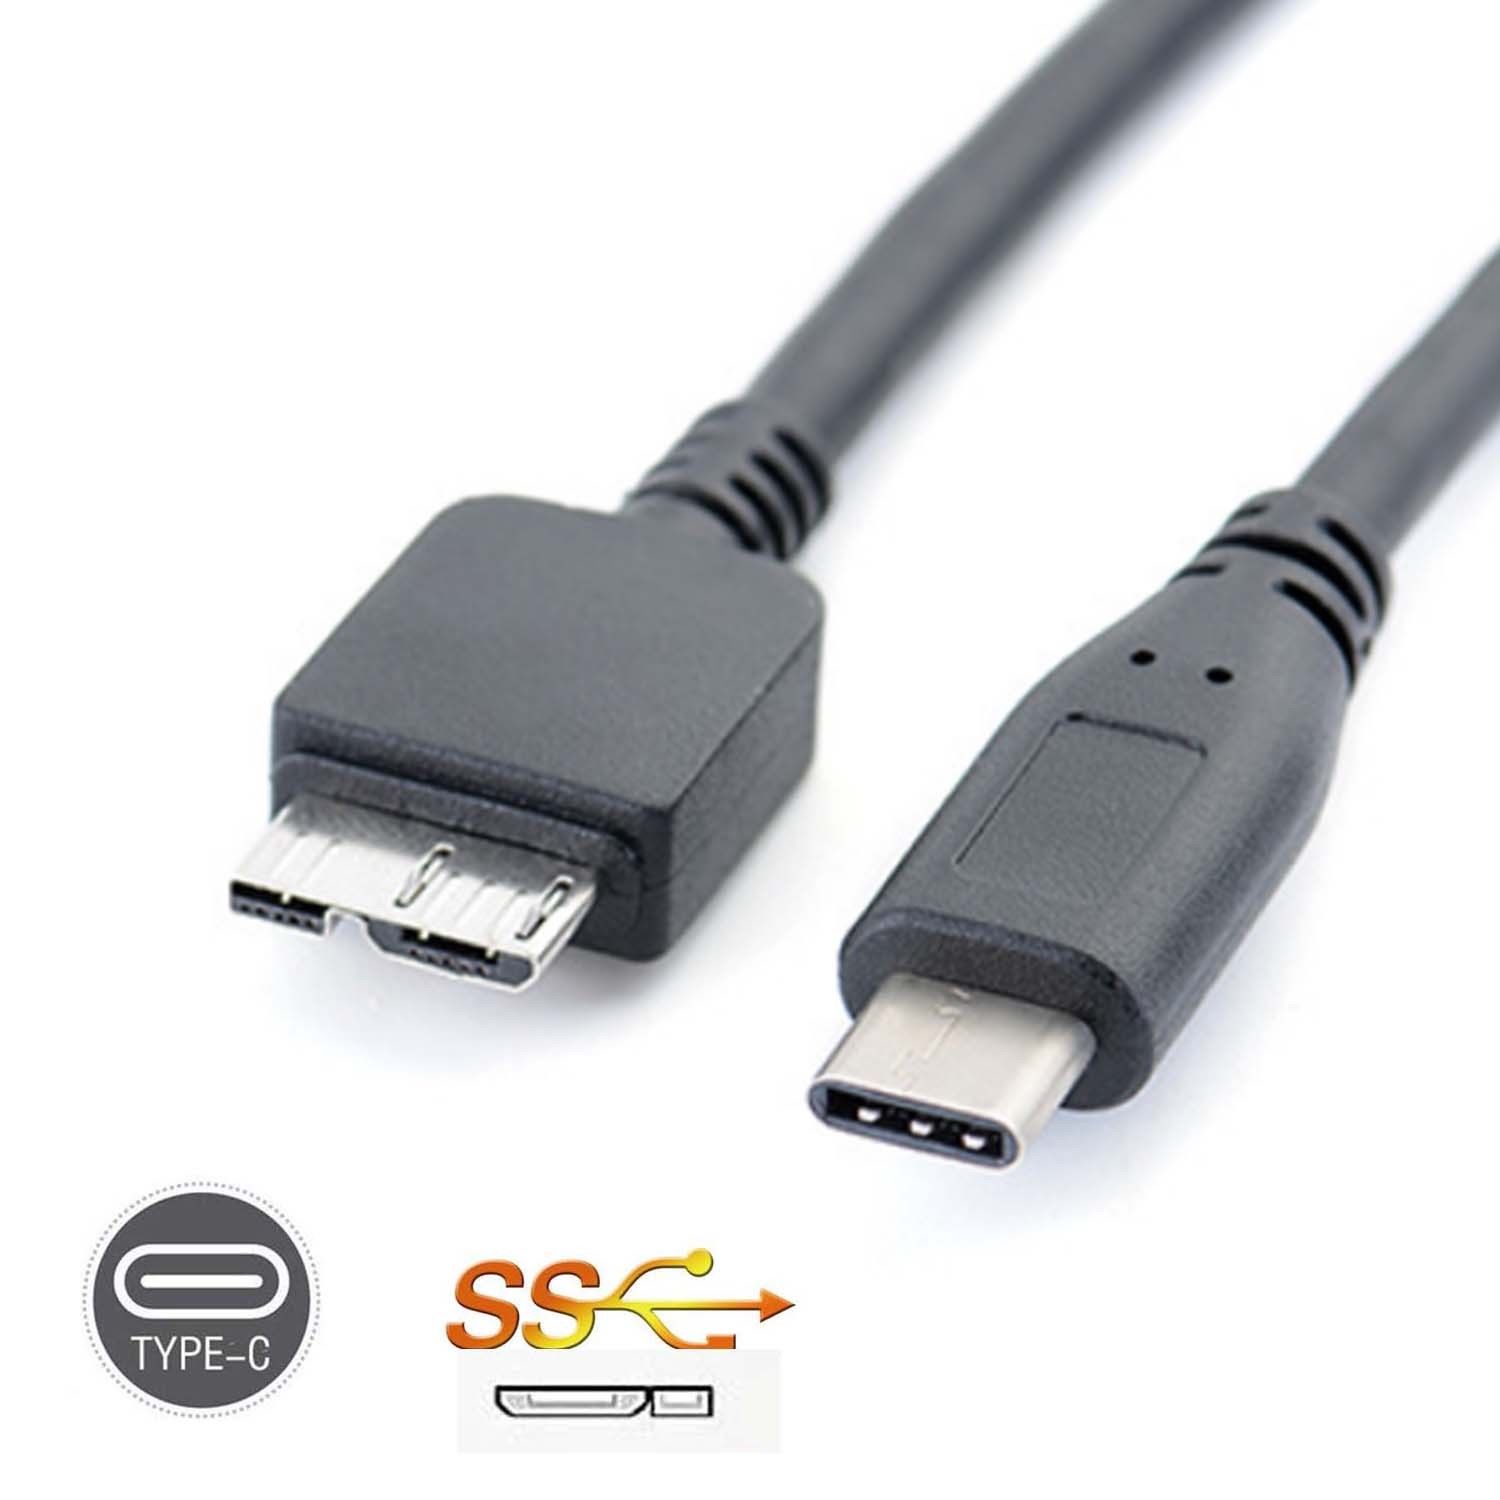 USB 3.1 Type-C USB-C to USB 3.0 Micro B Cable Connector For Macbook, MacBook Pro, MacBook Air 2018 to External Hard Drive